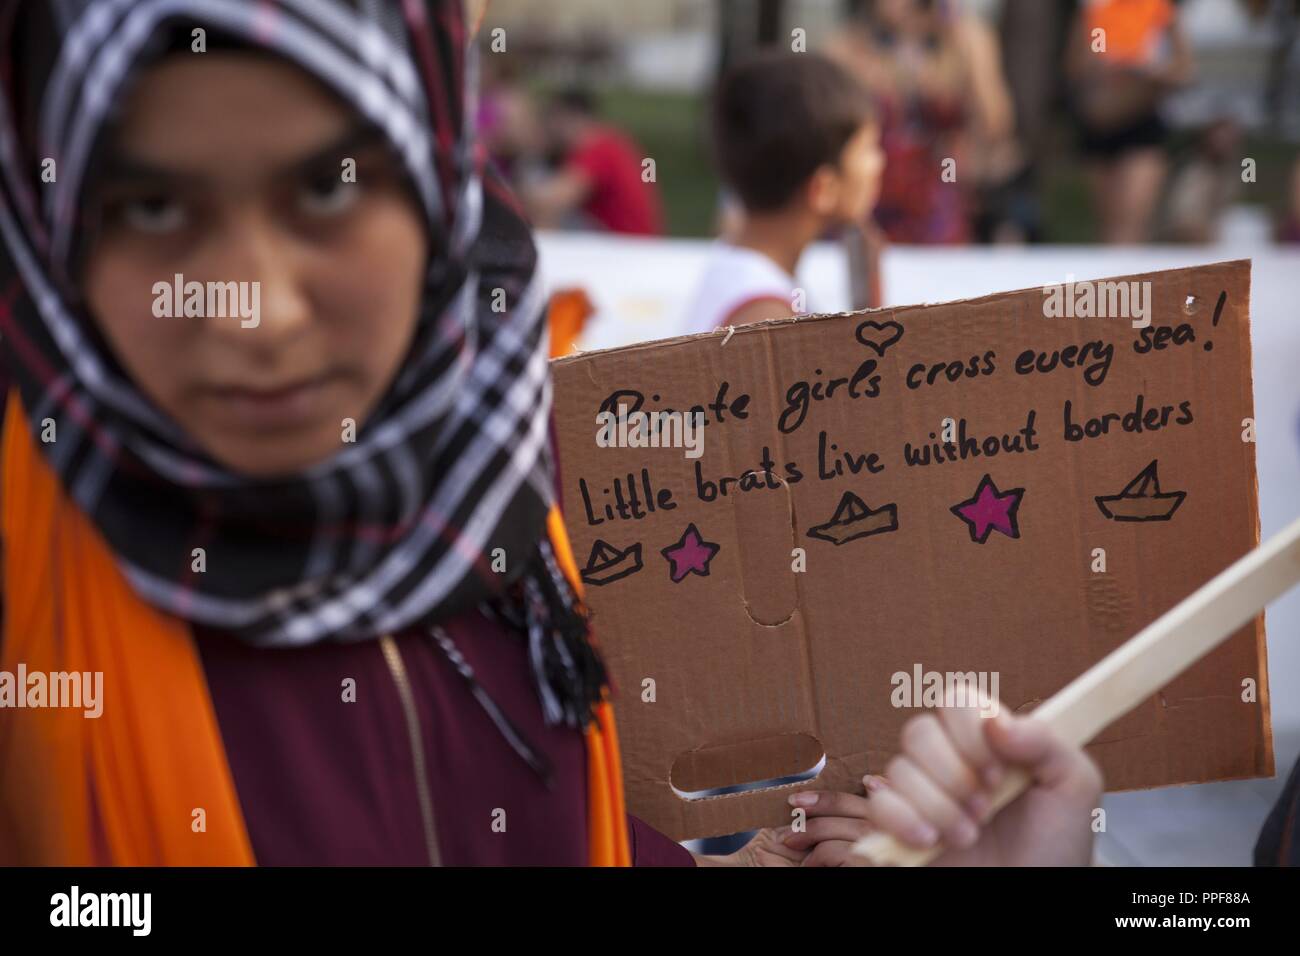 Refugee child with sign 'Pirate girls cross every sea. Little brats live without borders' during rally in Athens against omission of Sea Rescue. 01.09.2018 | usage worldwide Stock Photo